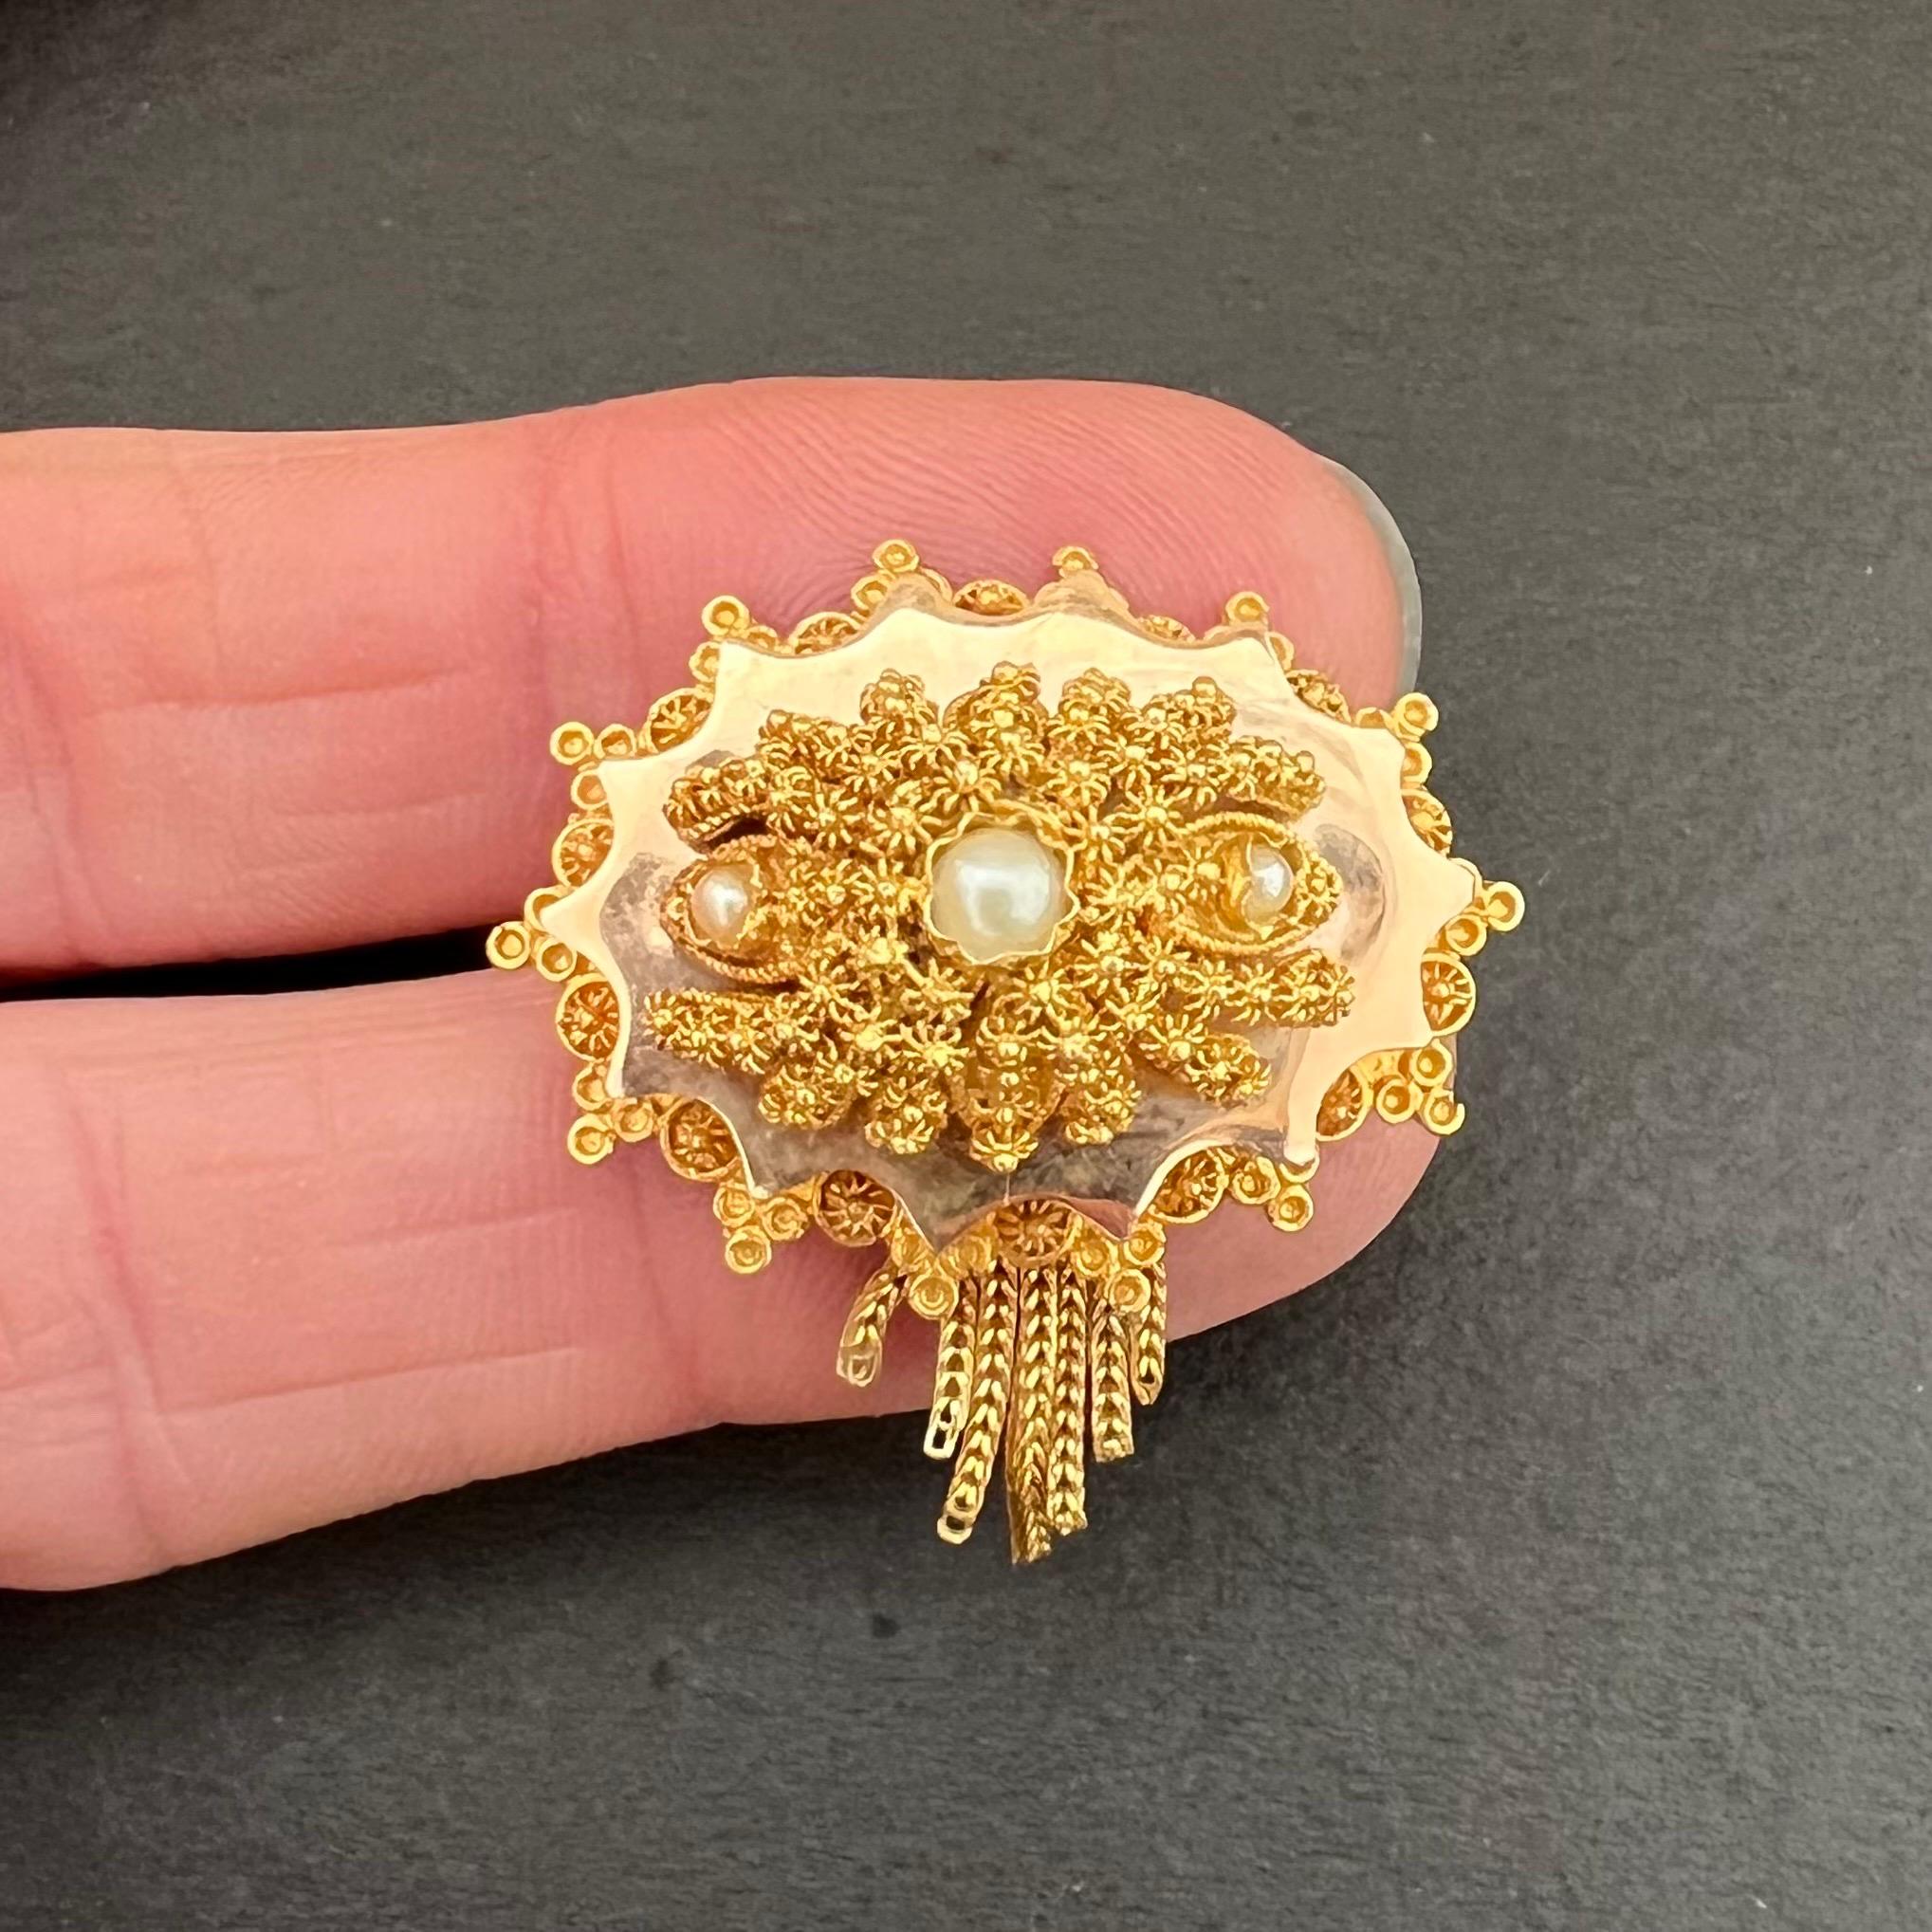 A 14 karat yellow gold cannetille brooch made in the Netherlands around 1900. The brooch is finely made with cannetille, gold twisted wire and buttons or knots decorate the top of the brooch. Between the ornate top of the brooch three seed pearls